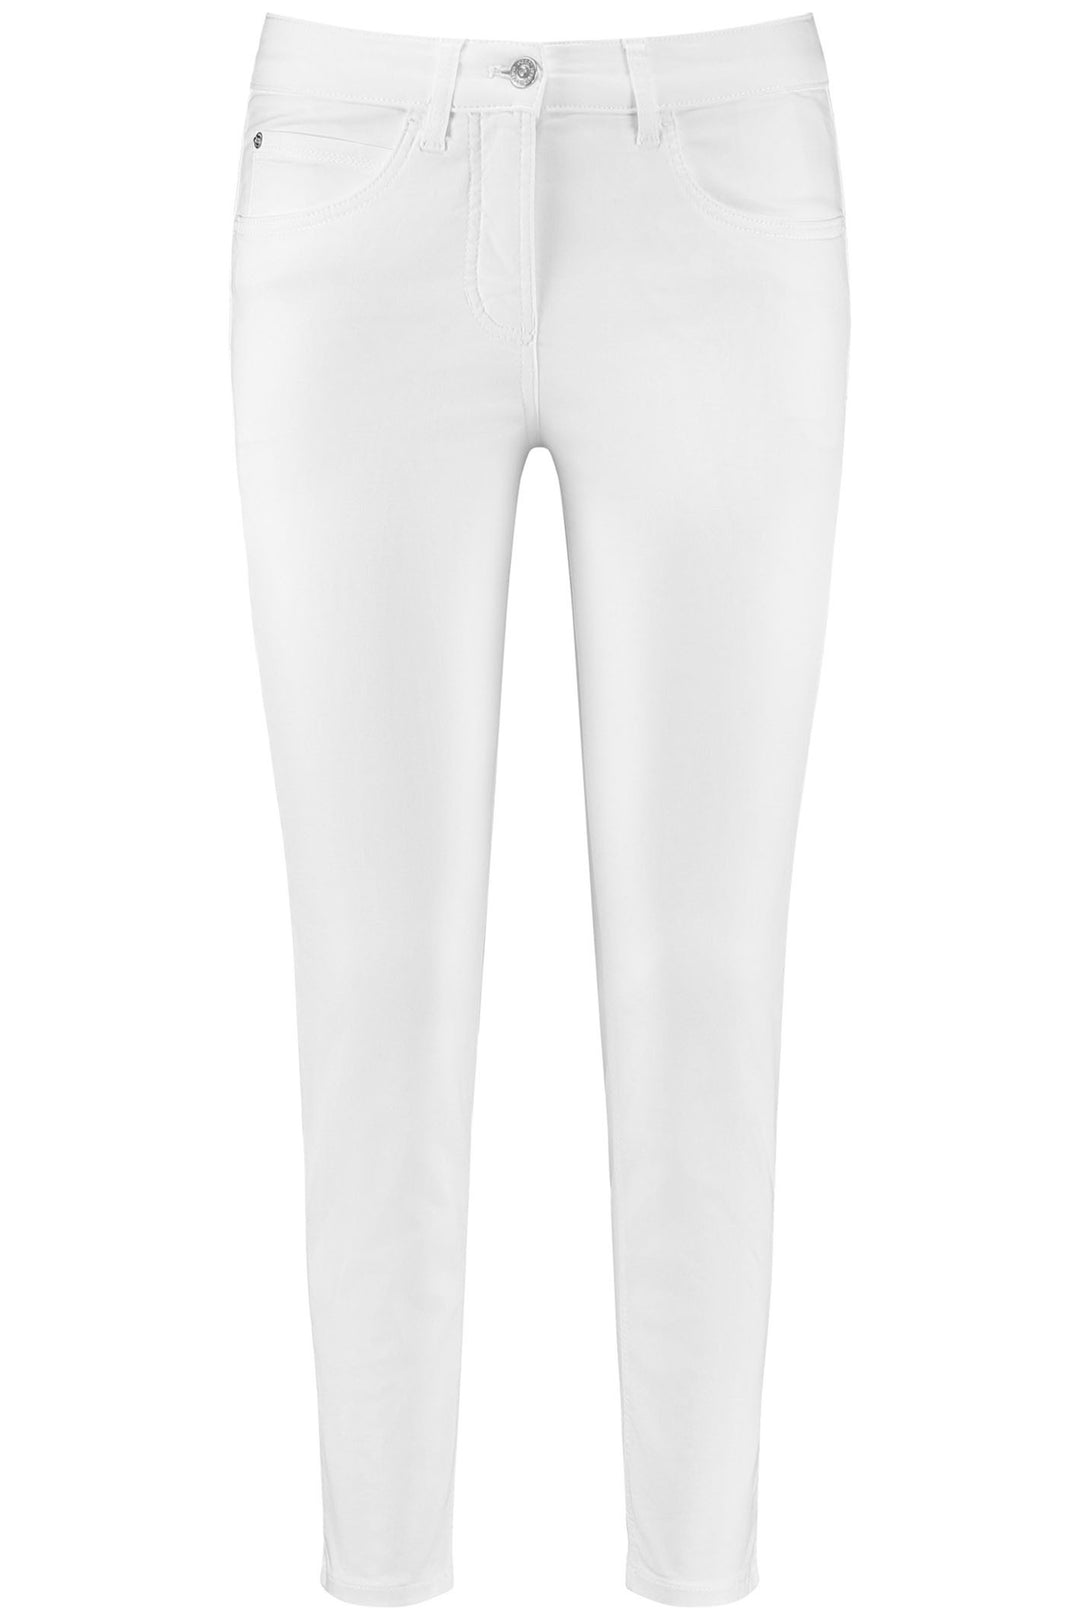 Gerry Weber 925055-67965 White 5 Pocket Jeans - Dotique Chesterfield